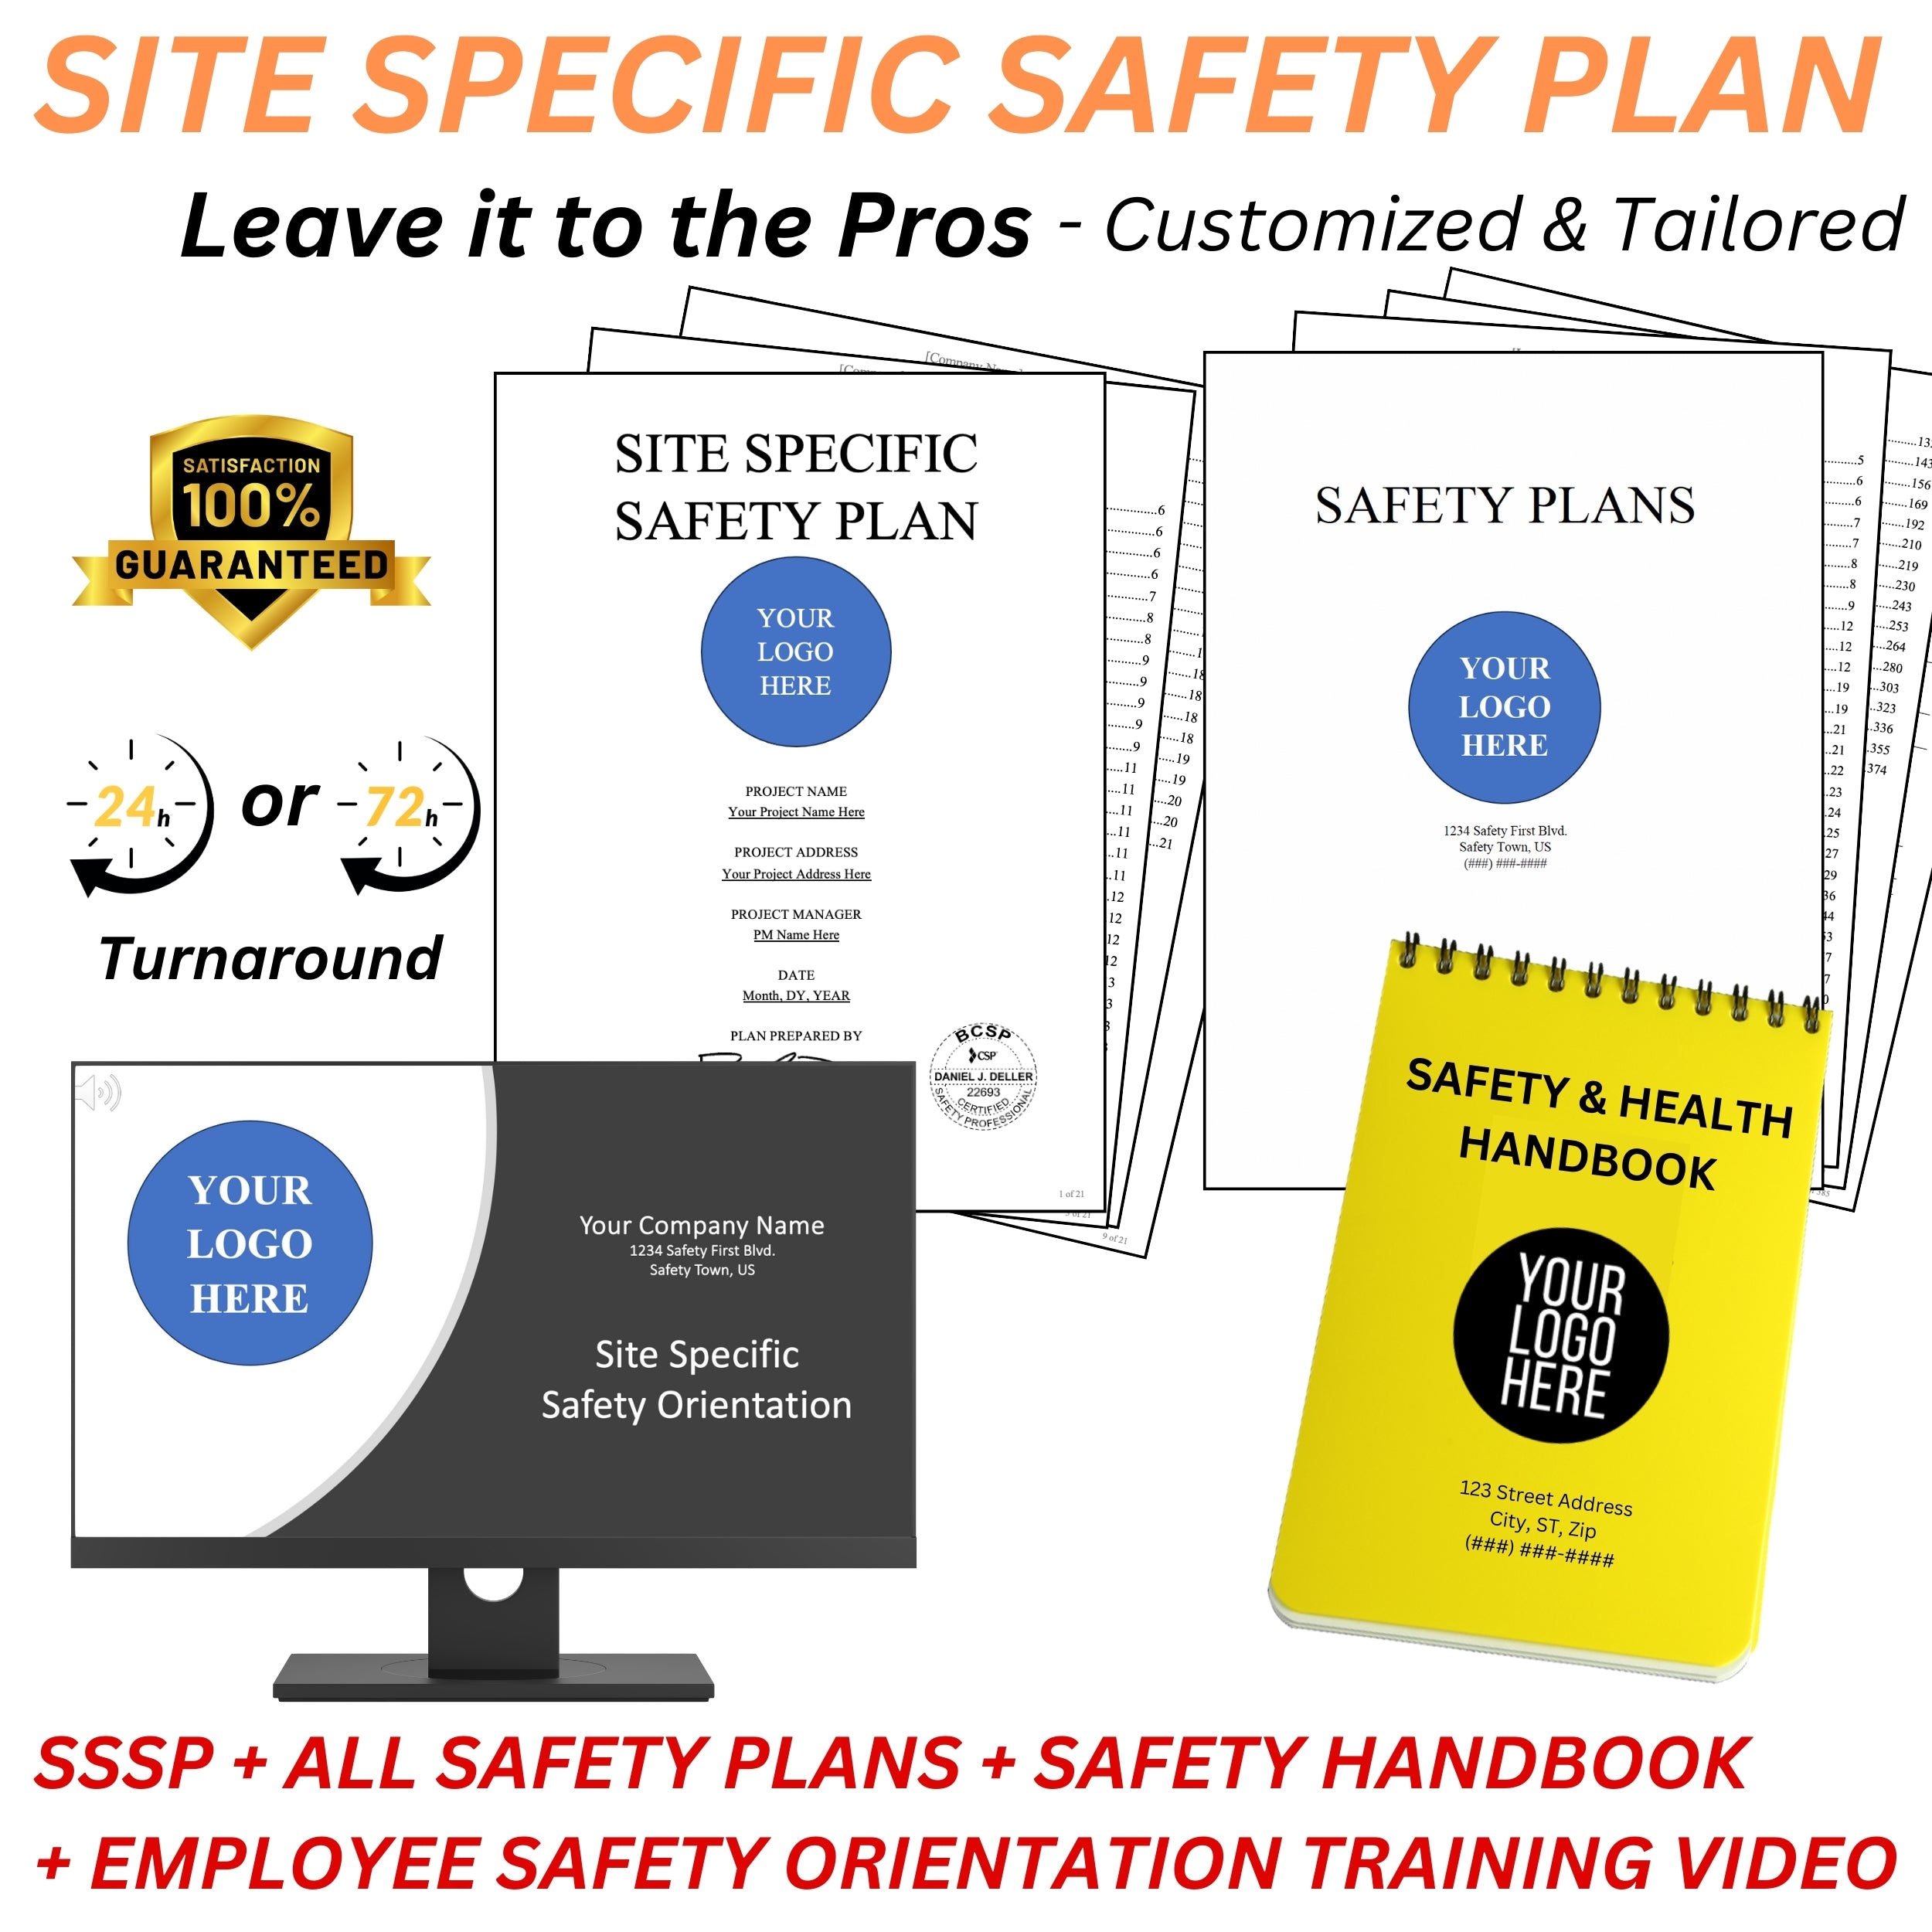 Site Specific Safety Plan